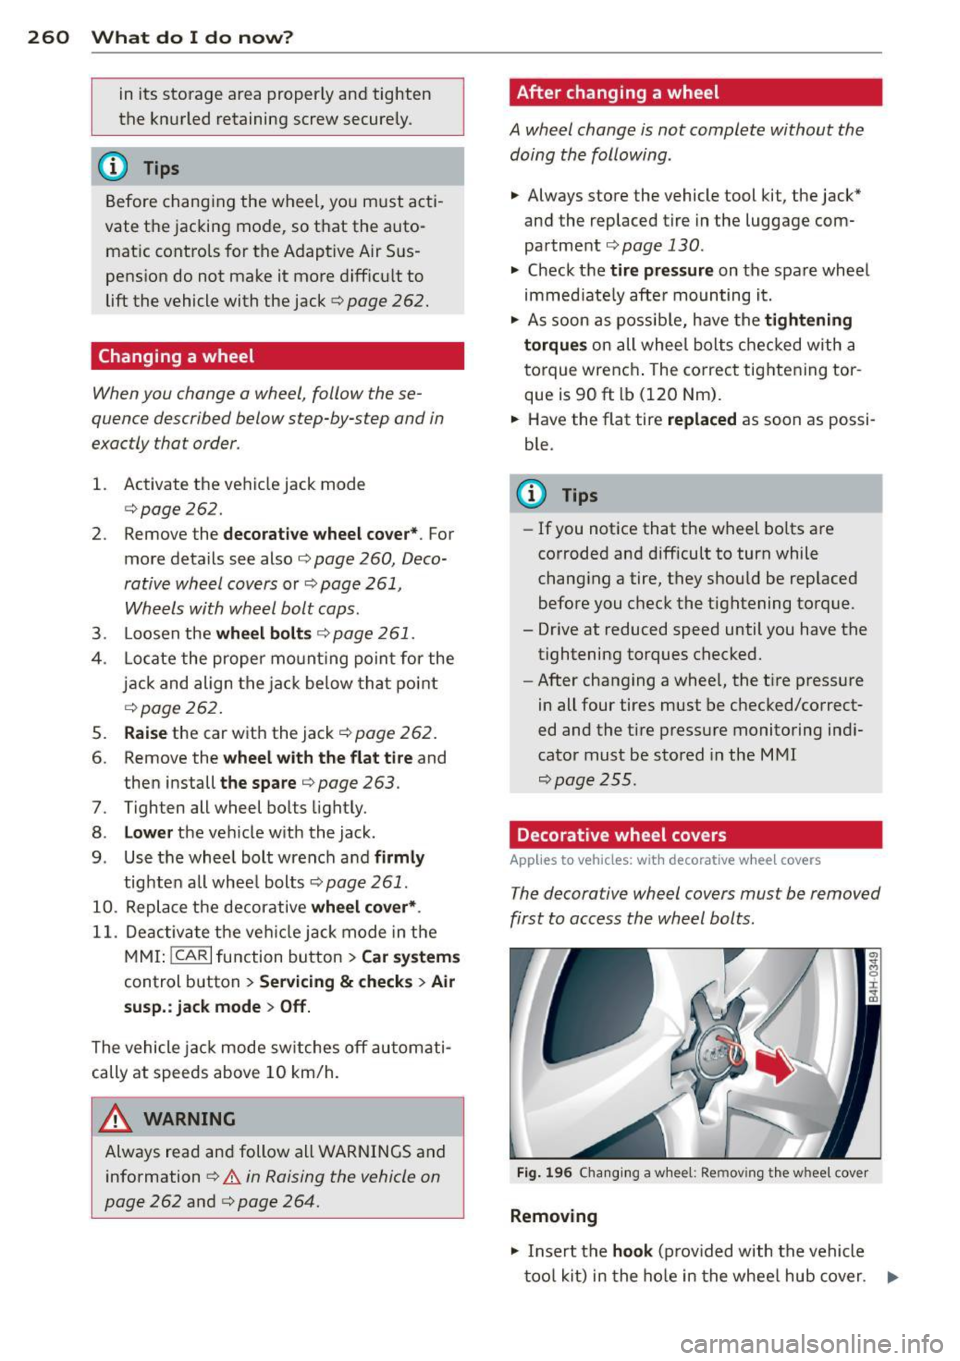 AUDI A8 2012  Owners Manual 260  What  do  I  do  now ? 
in  its  storage  area  properly  and  tighten 
the  knurled  retaining  screw  securely. 
@ Tips 
Before  changing  the  wheel,  you  m ust  acti ­
vate  t he jacking  m